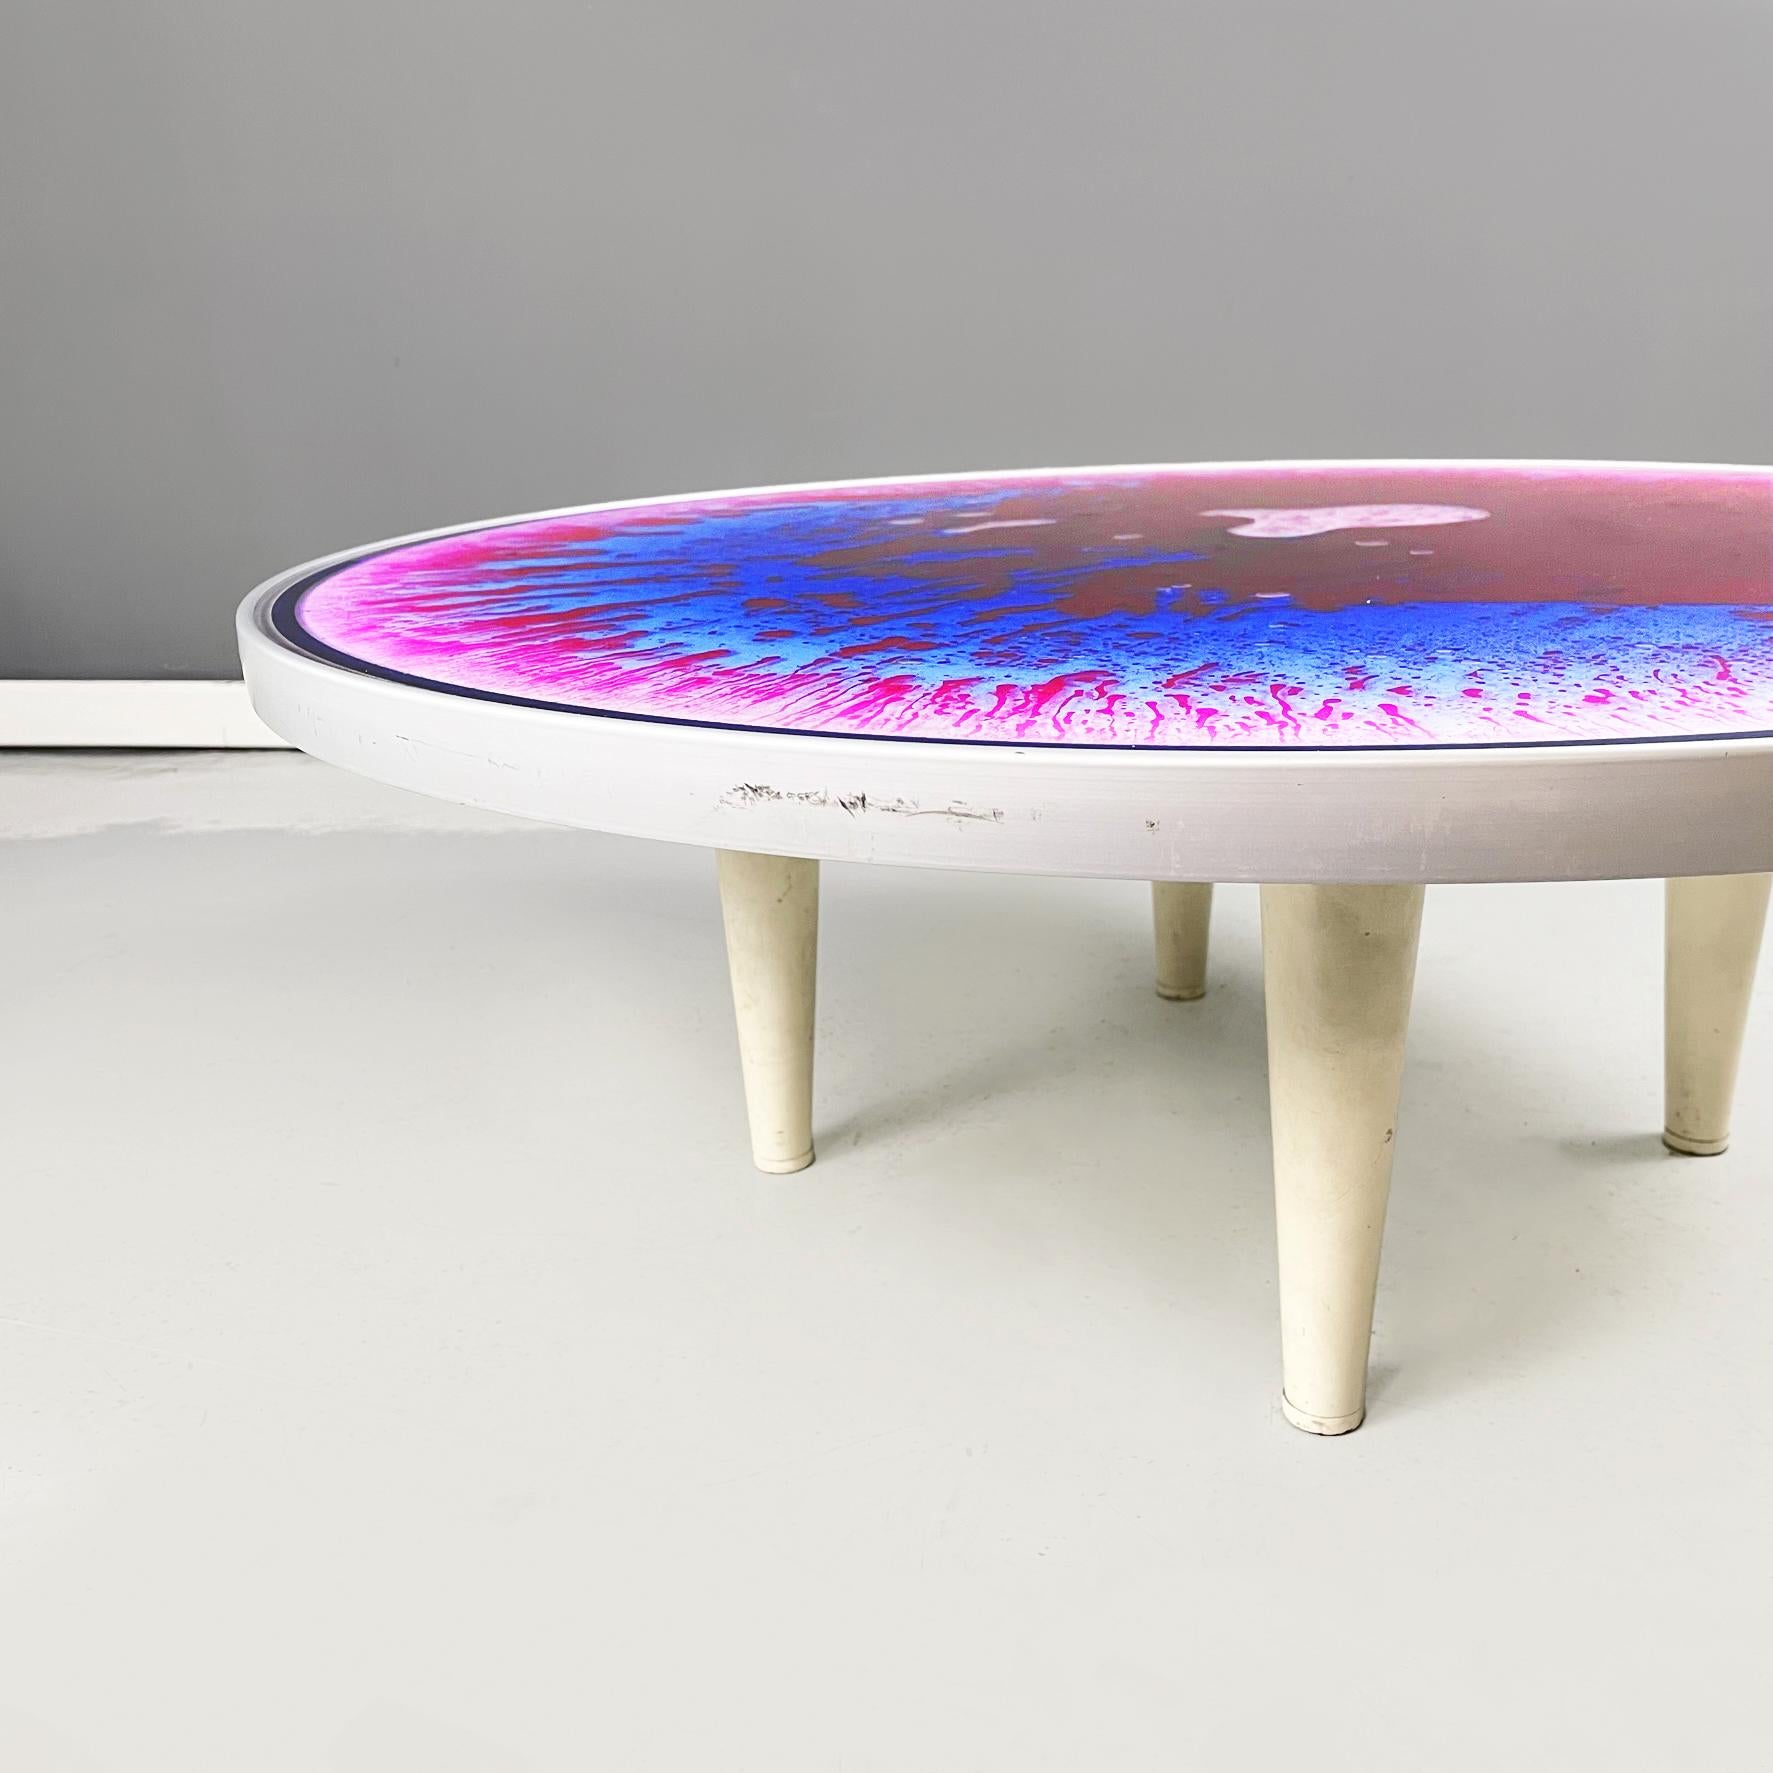 Late 20th Century Italian Space Age Plastic and Metal Round Coffee Table with Tie Dye Effect 1970s For Sale